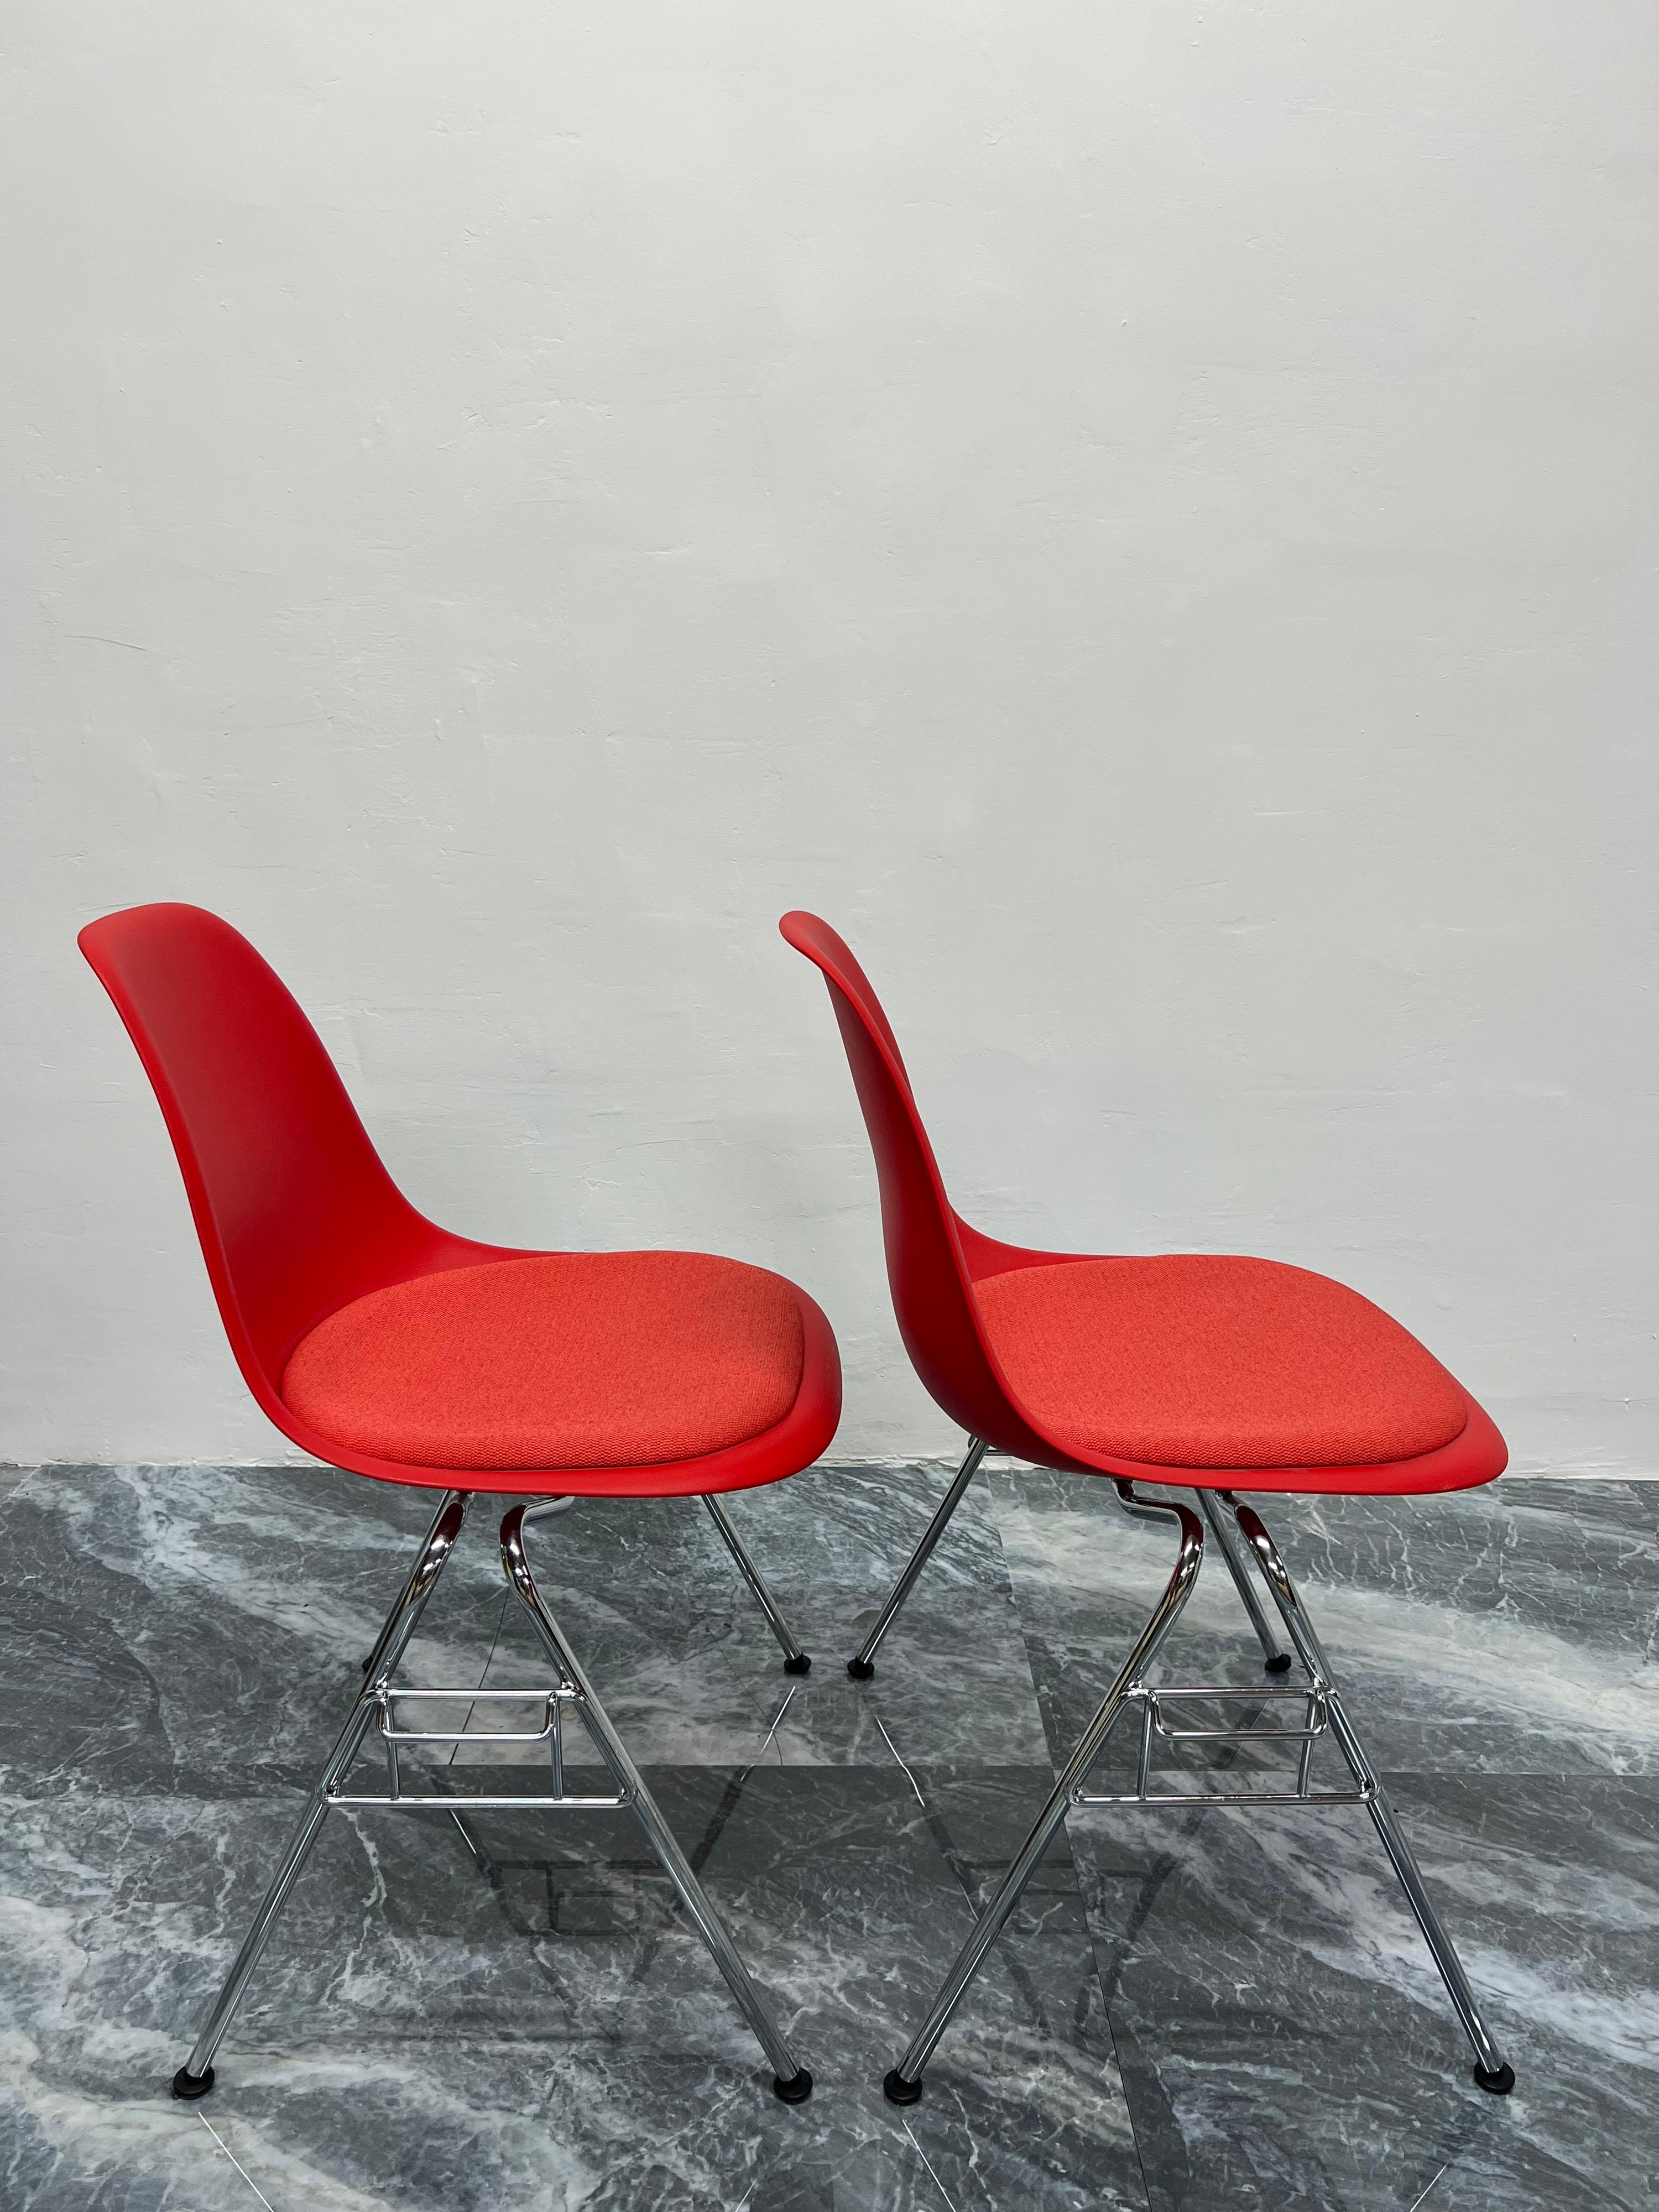 Mid-Century Modern Eames Molded Plastic Chairs with Upholstered Seats for Herman Miller, a Pair